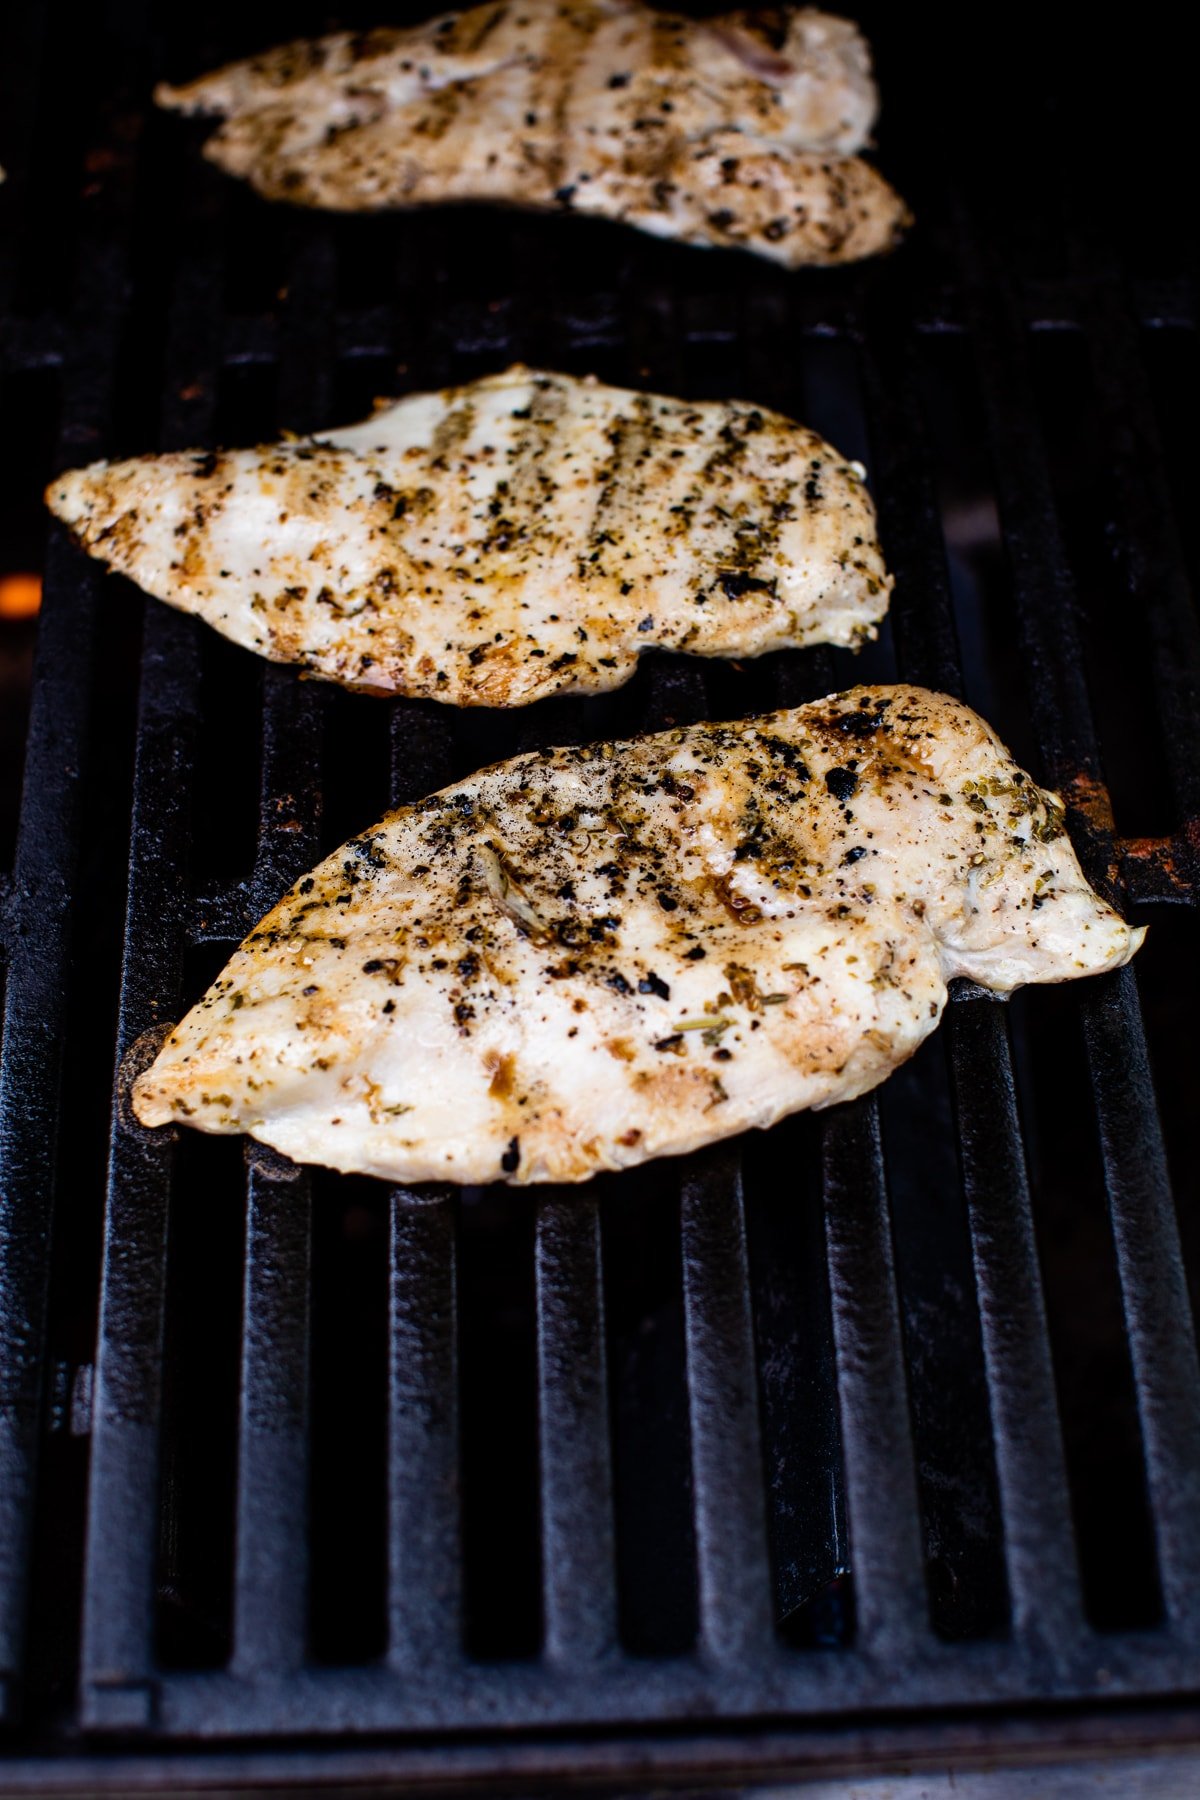 Grilled Chicken Breast 2 - How To Make Perfect Grilled Chicken Breast